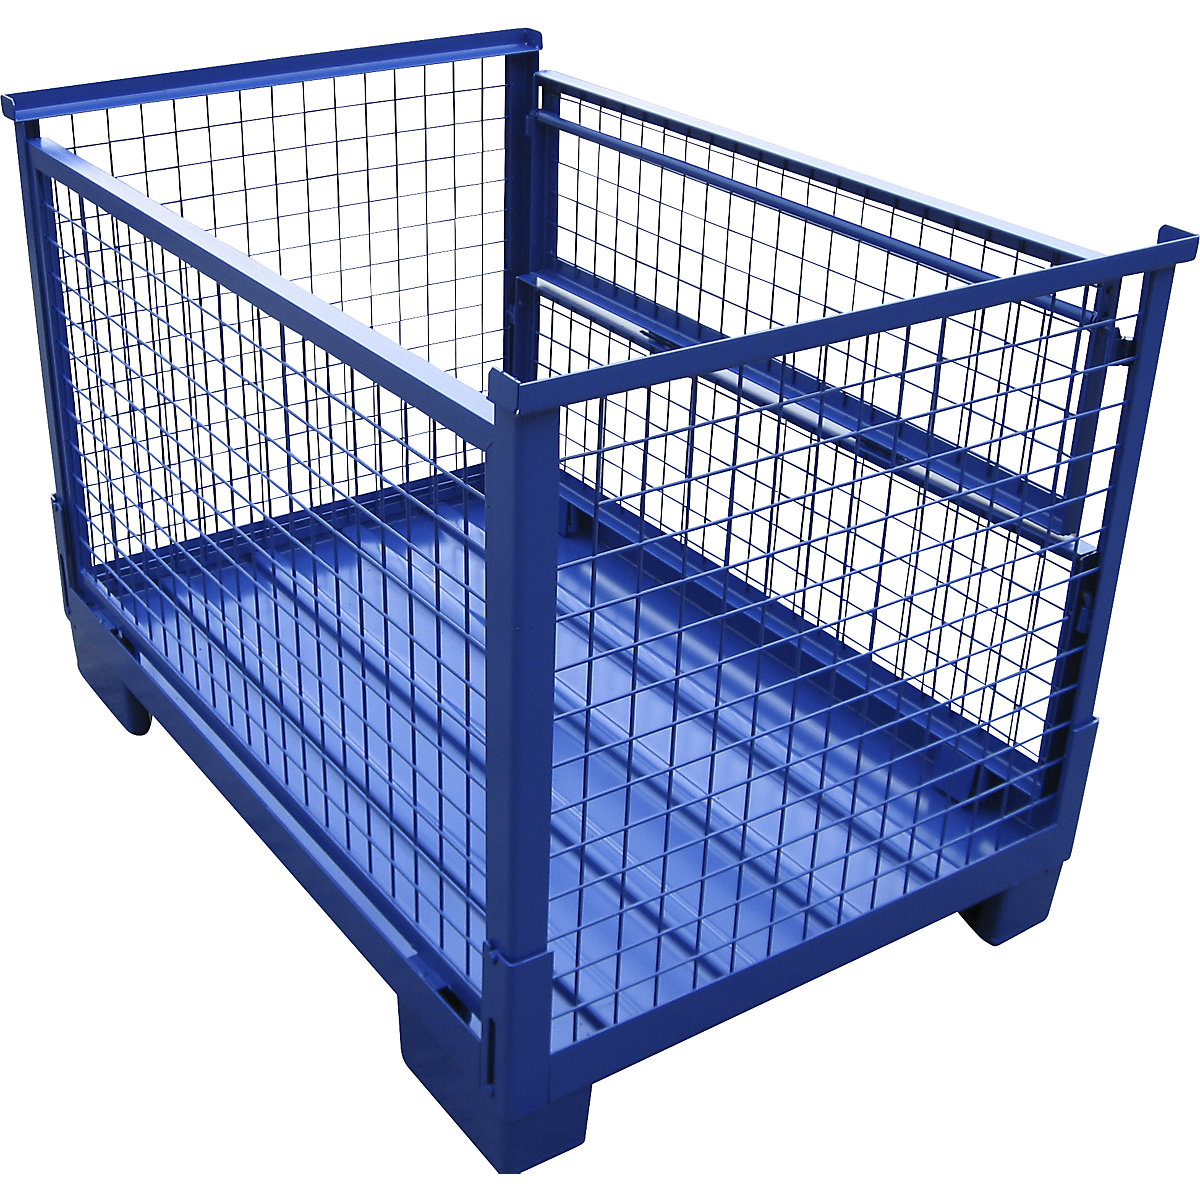 Euro stacking box, folding – Heson, LxW 1240 x 835 mm, max. load 1000 kg, gentian blue-4